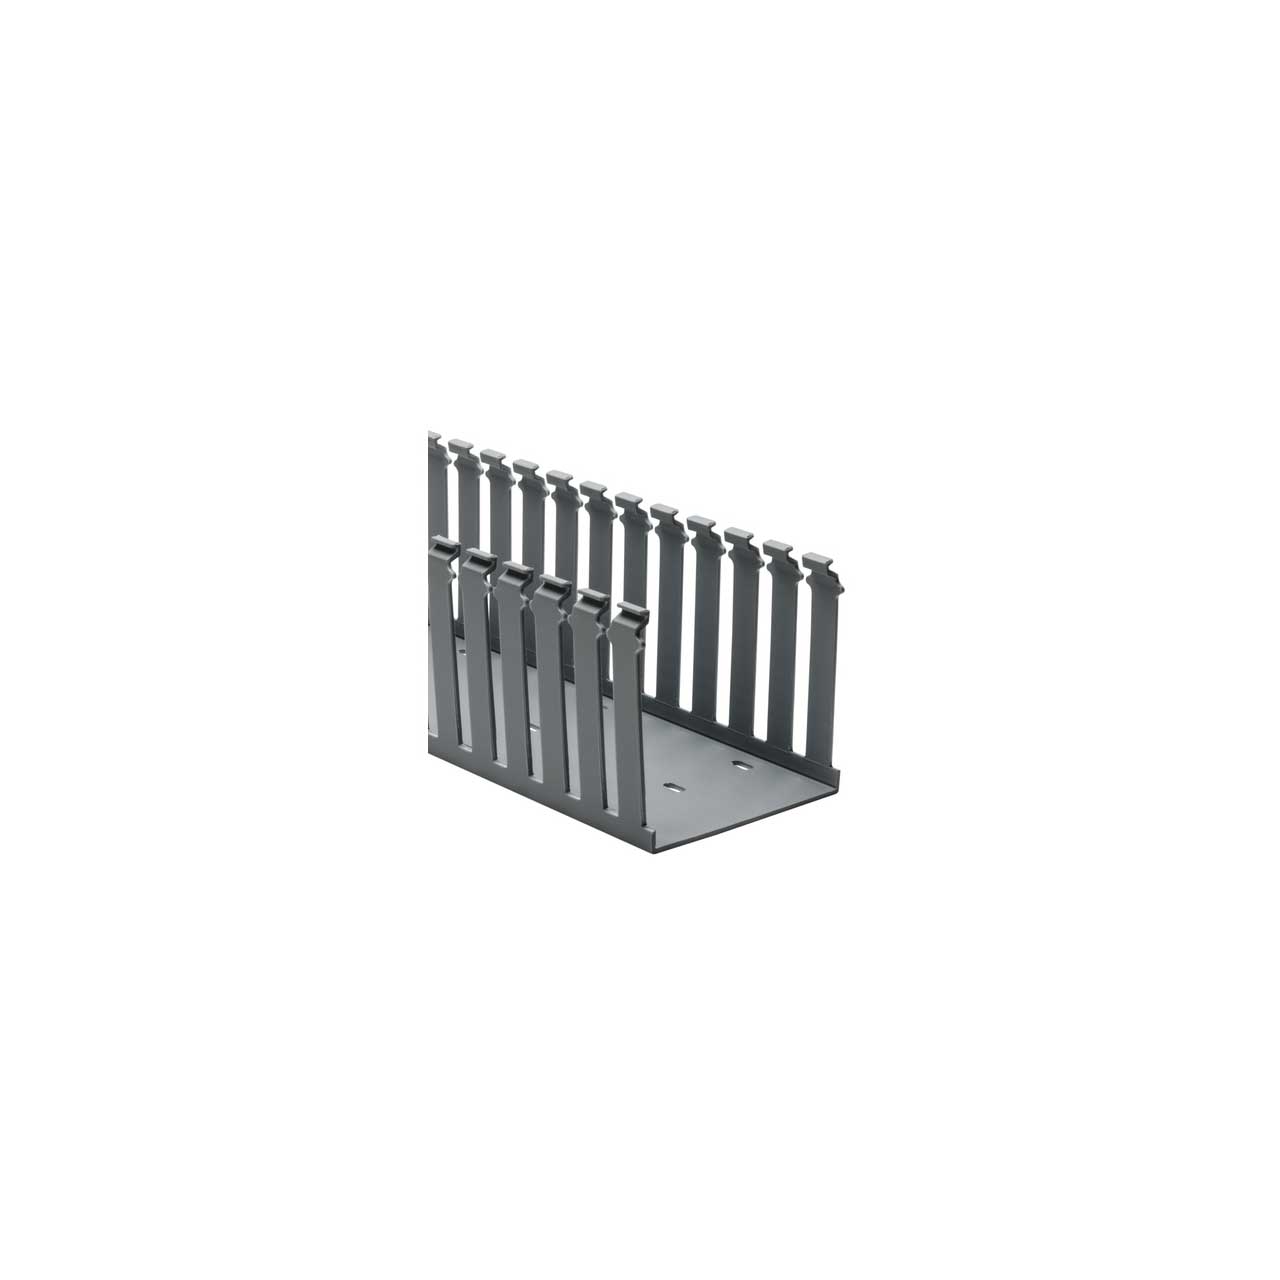 HellermannTyton 181-33016 Non-Adhesive Slotted Wall Duct 3x3-Inch x6 Foot - Gray - 20 Pack 181-33016-20